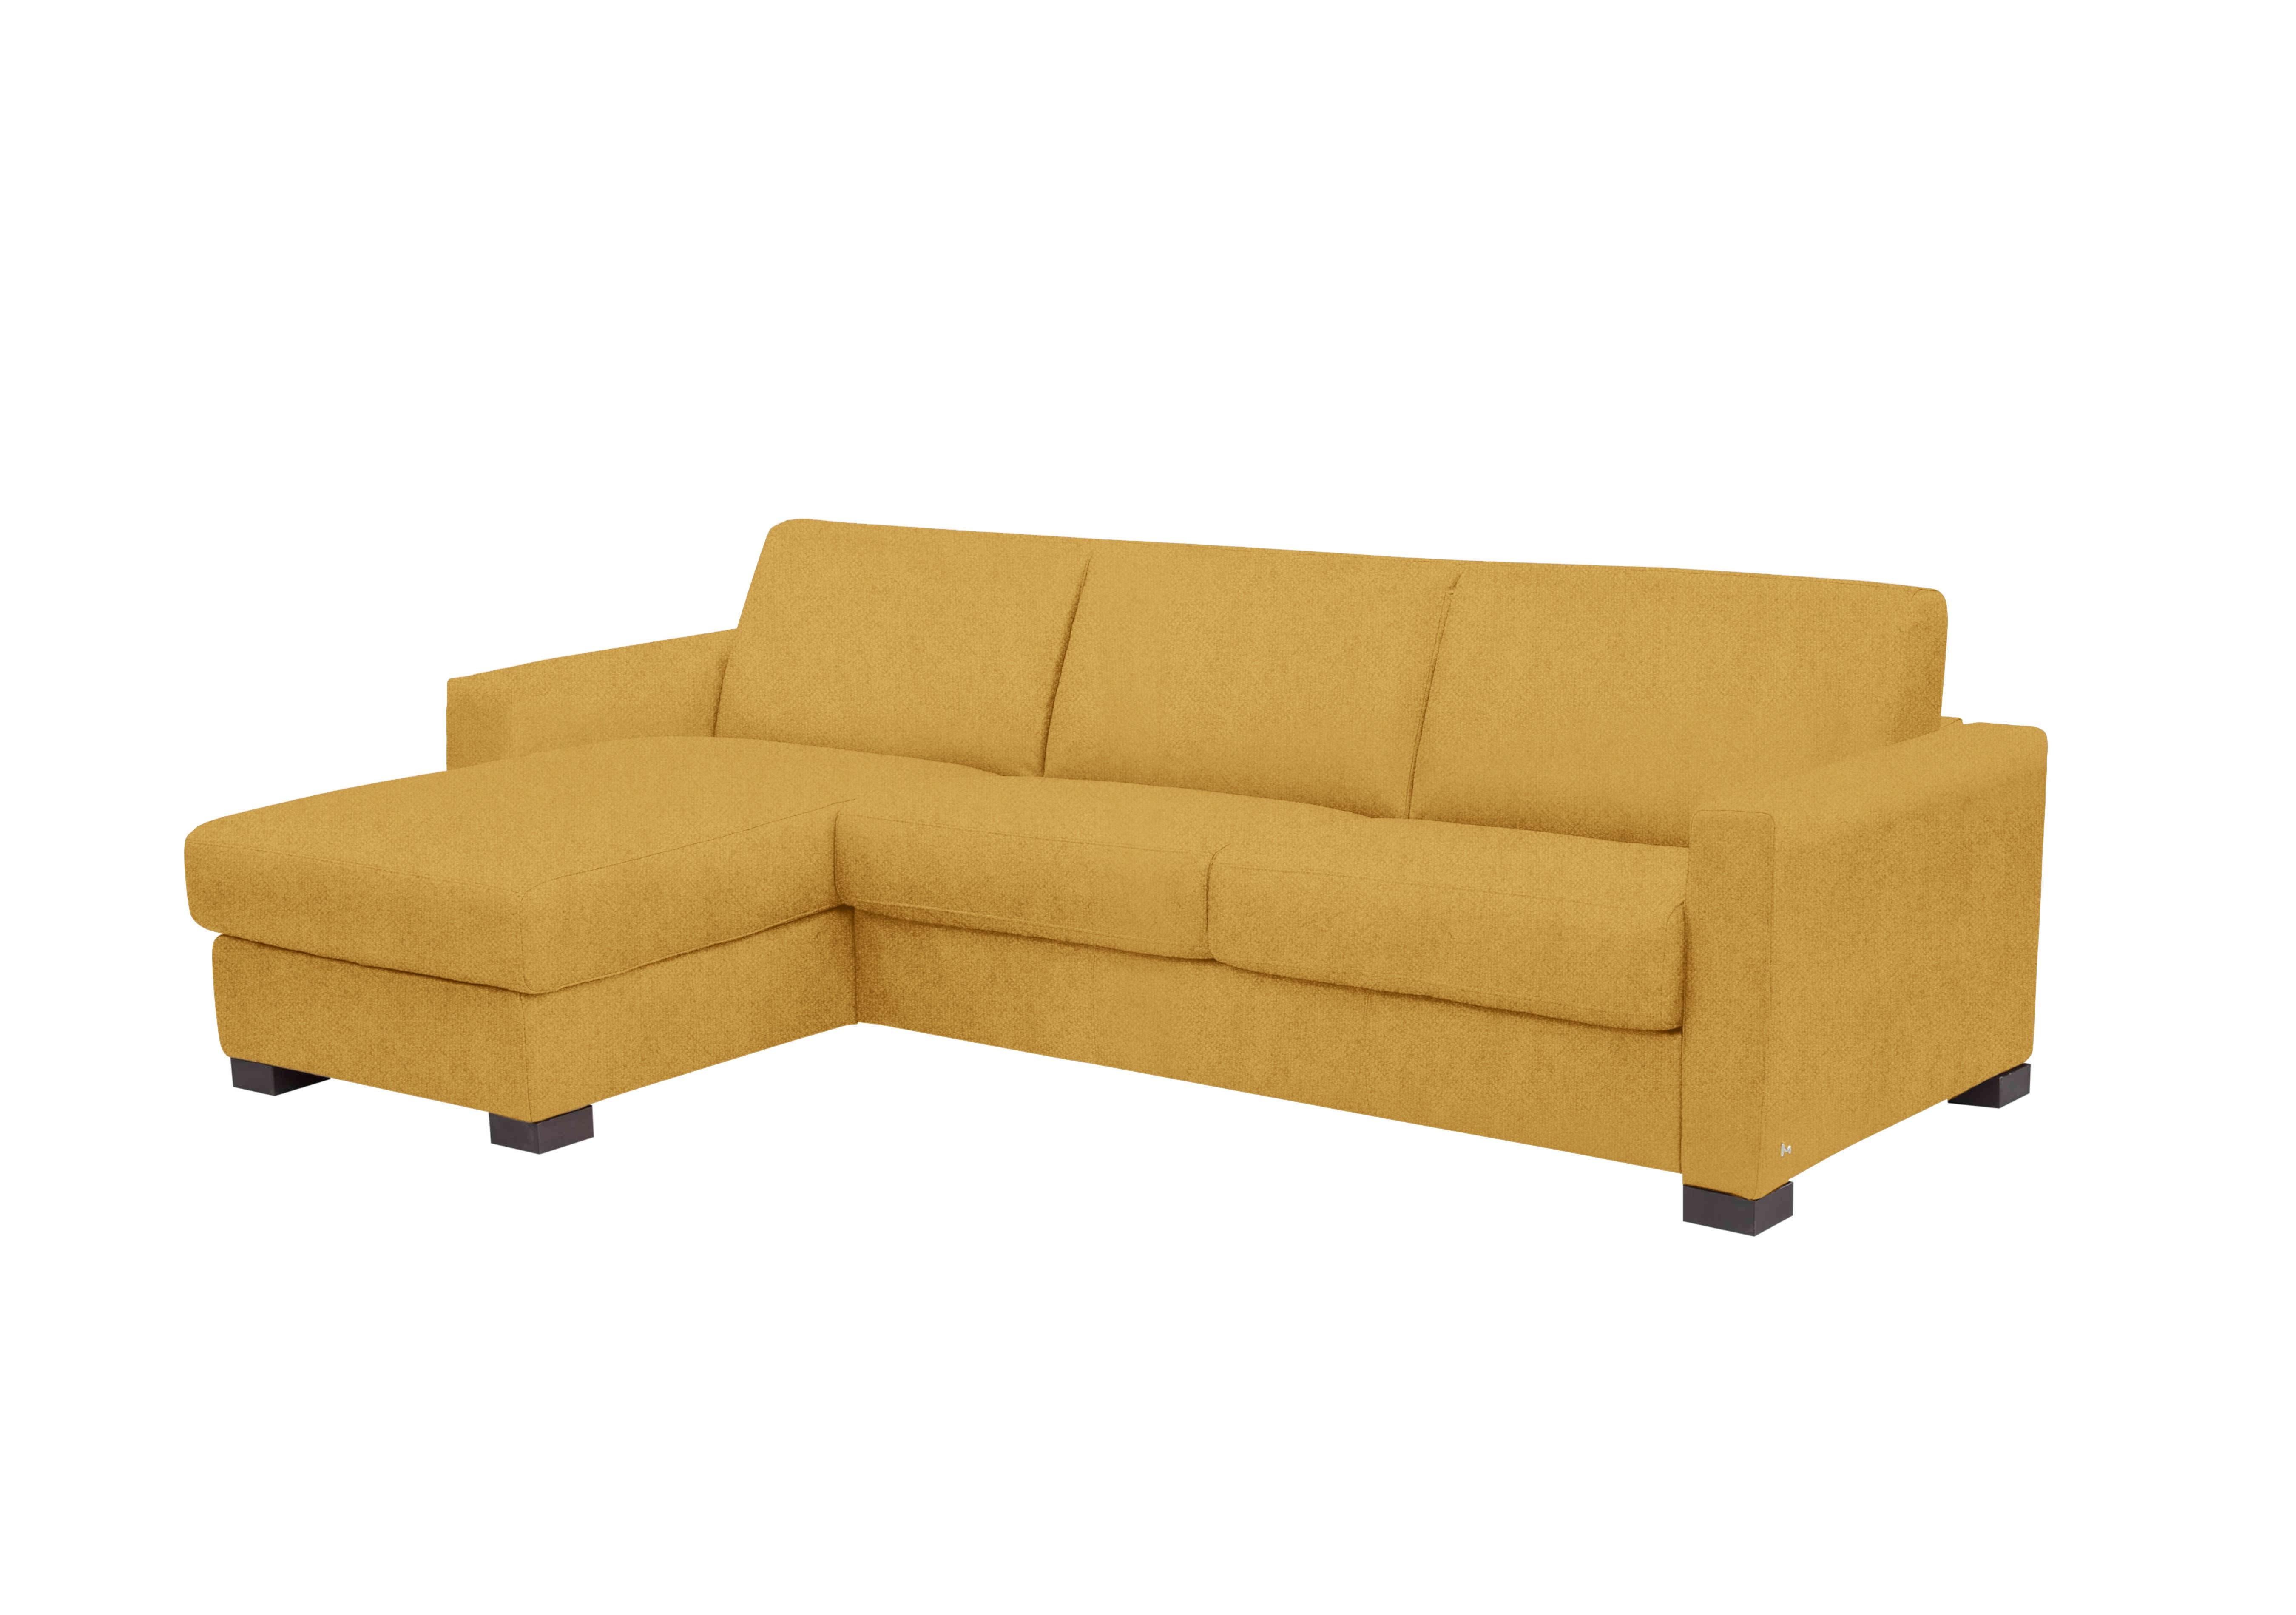 Alcova 3 Seater Fabric Sofa Bed with Storage Chaise with Box Arms in Fuente Mostaza on Furniture Village